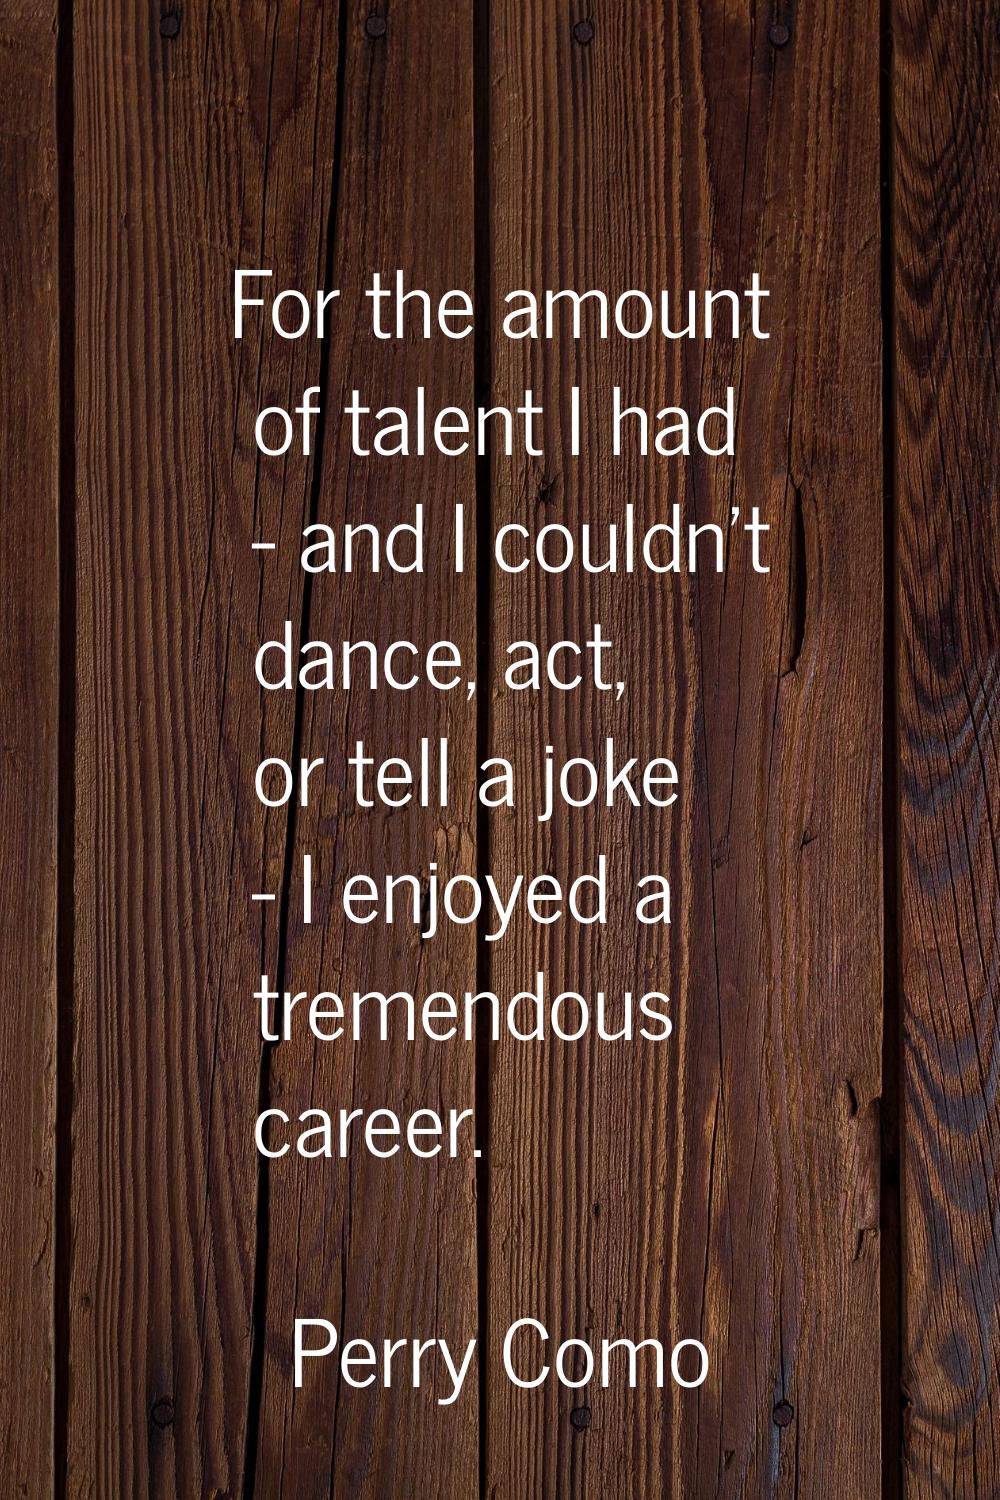 For the amount of talent I had - and I couldn't dance, act, or tell a joke - I enjoyed a tremendous